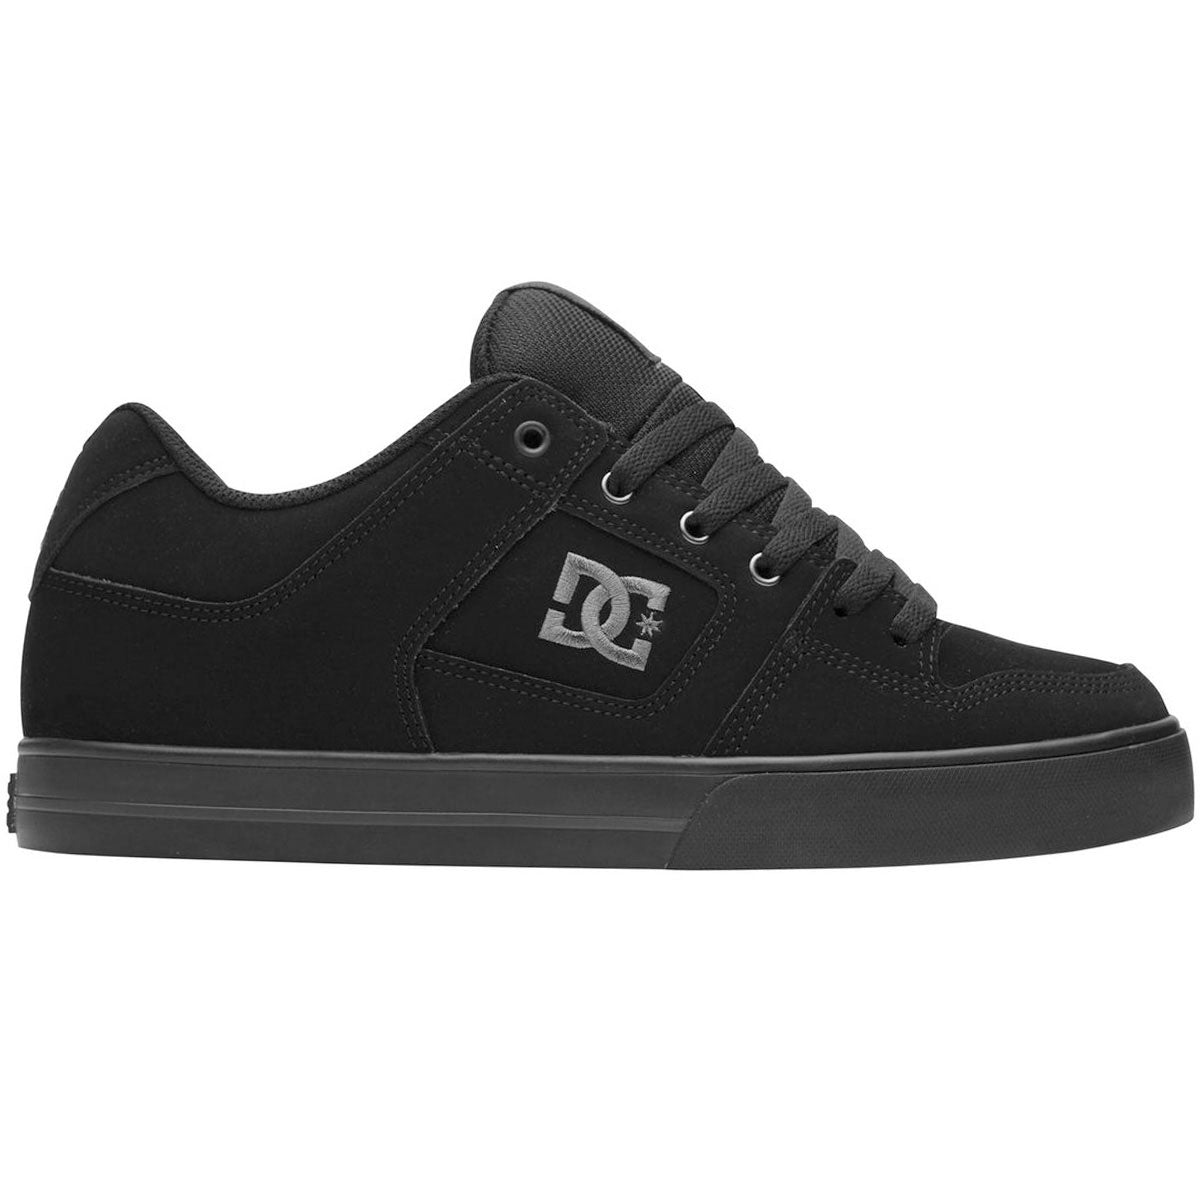 DC Pure Shoes - Black/Pirate image 1